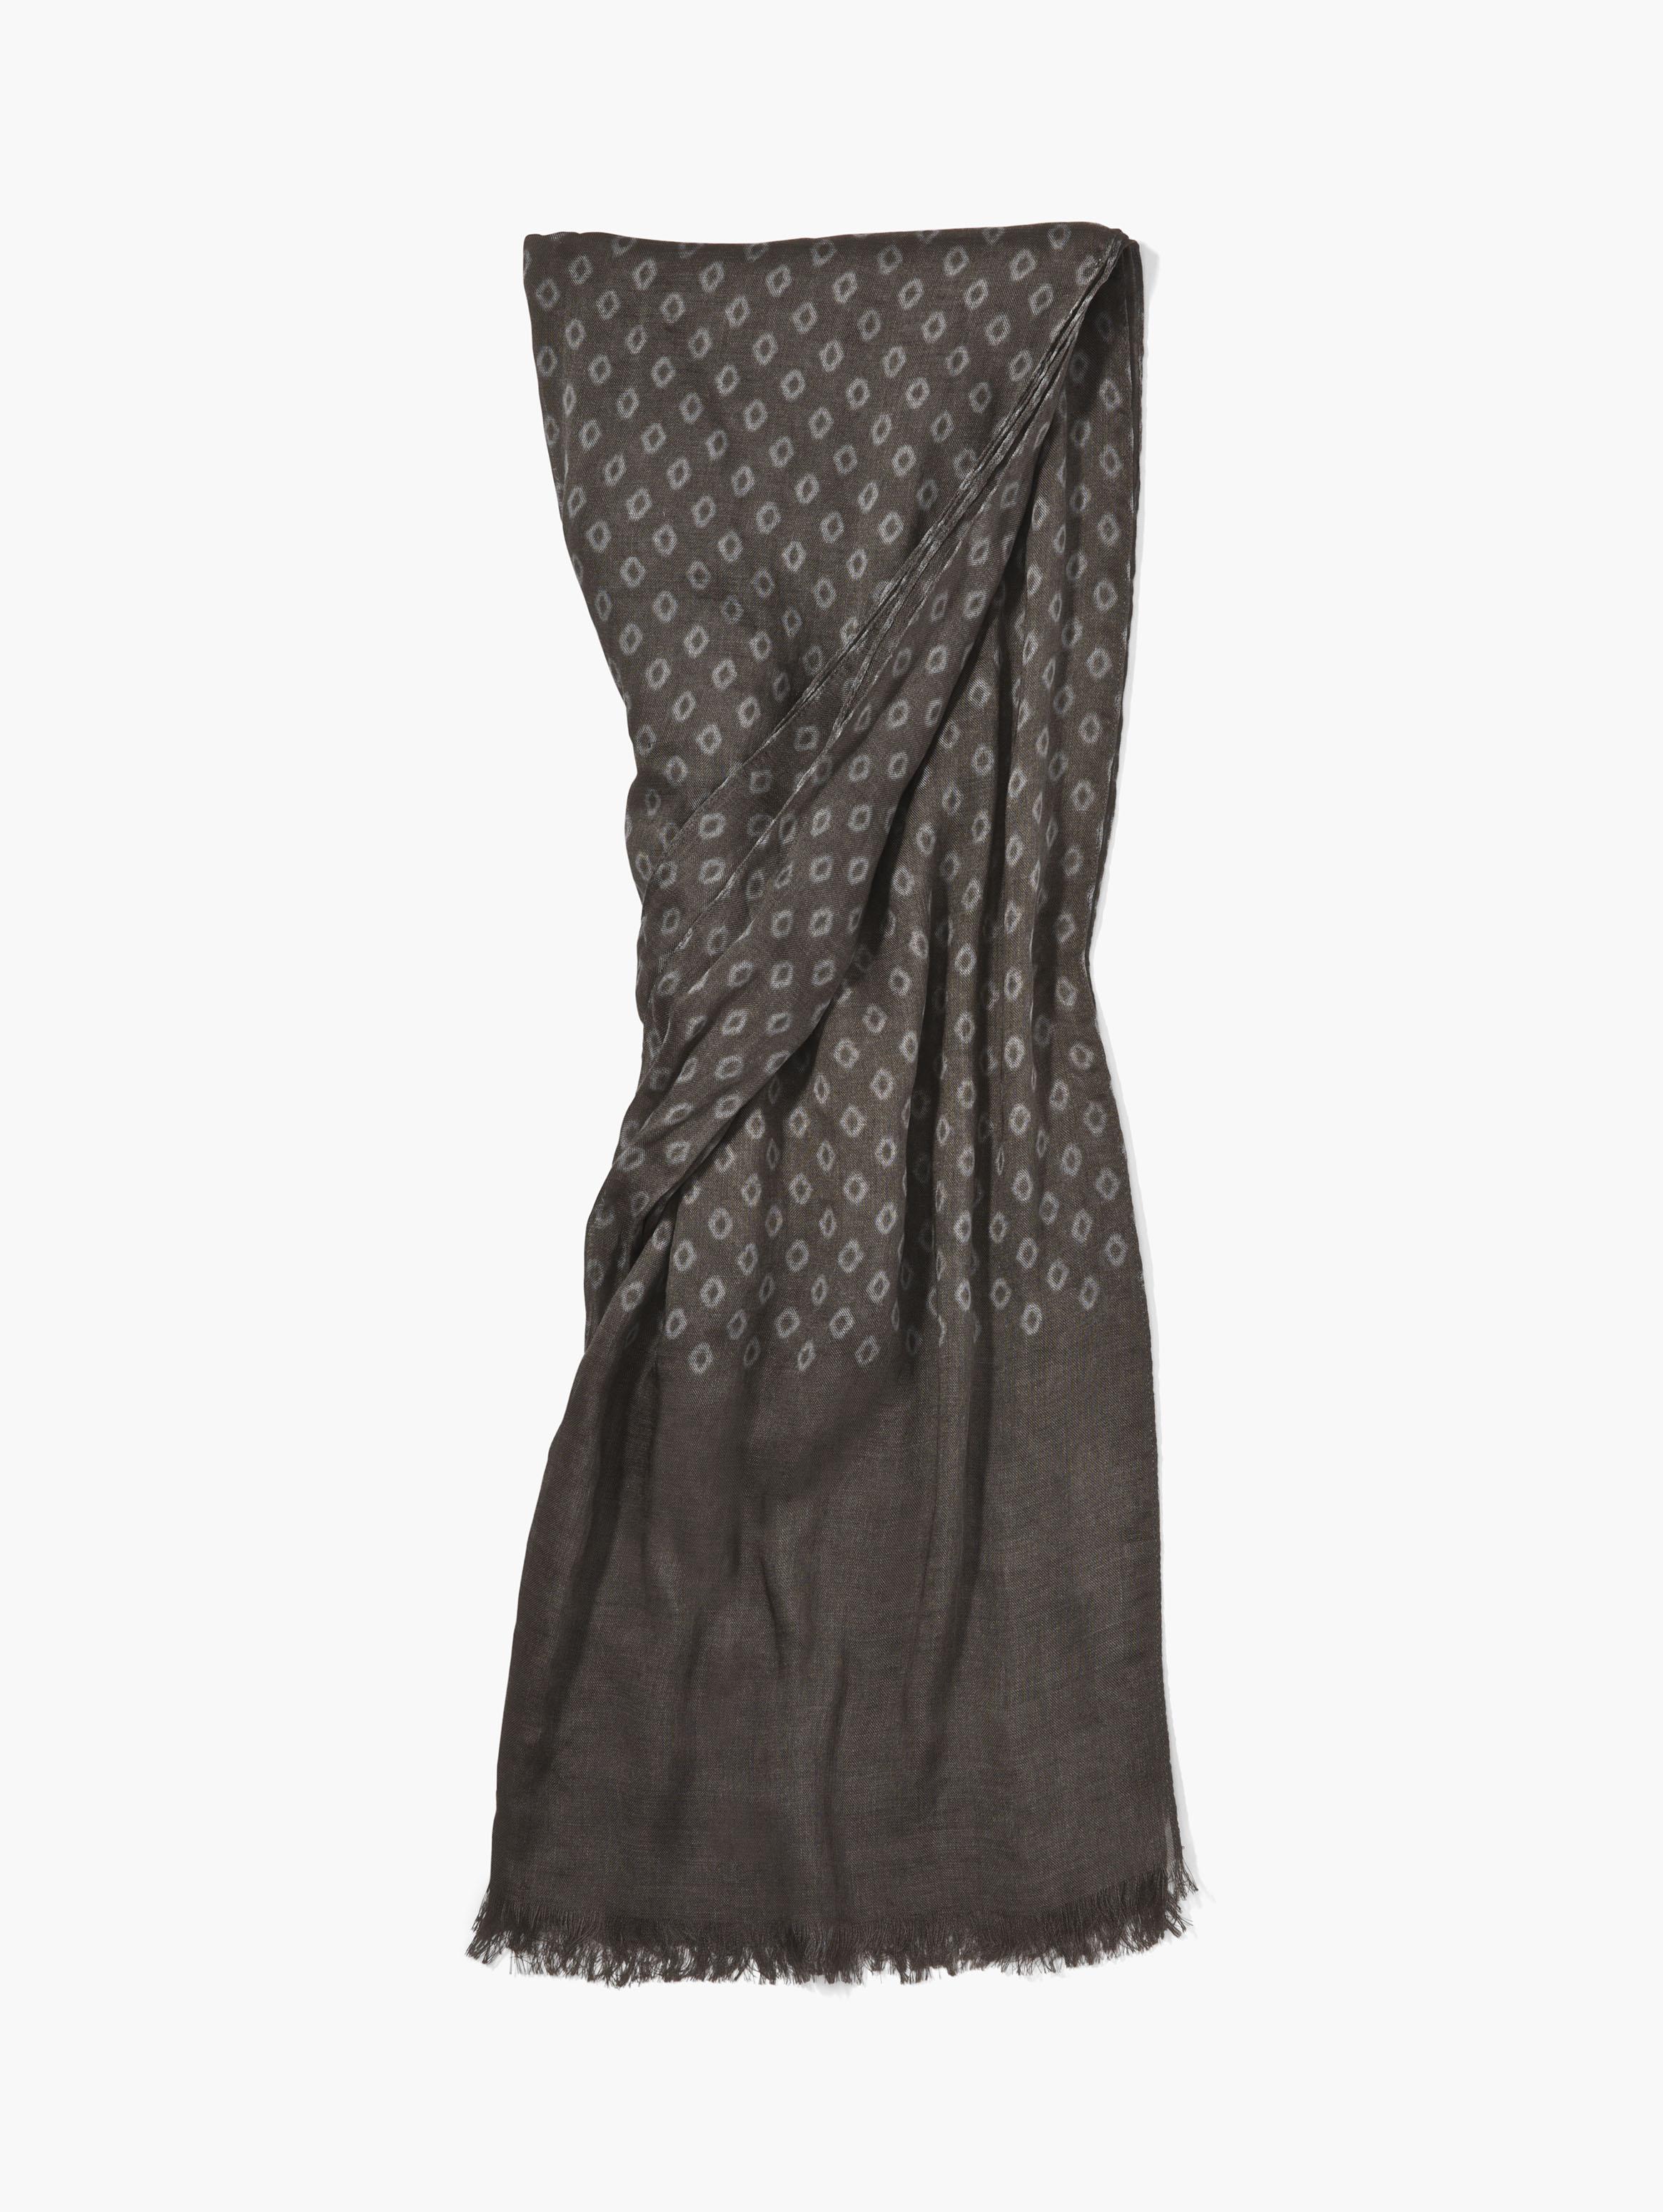 WOVEN CRINKLED GEOMETRIC PATTERNED SCARF image number 1